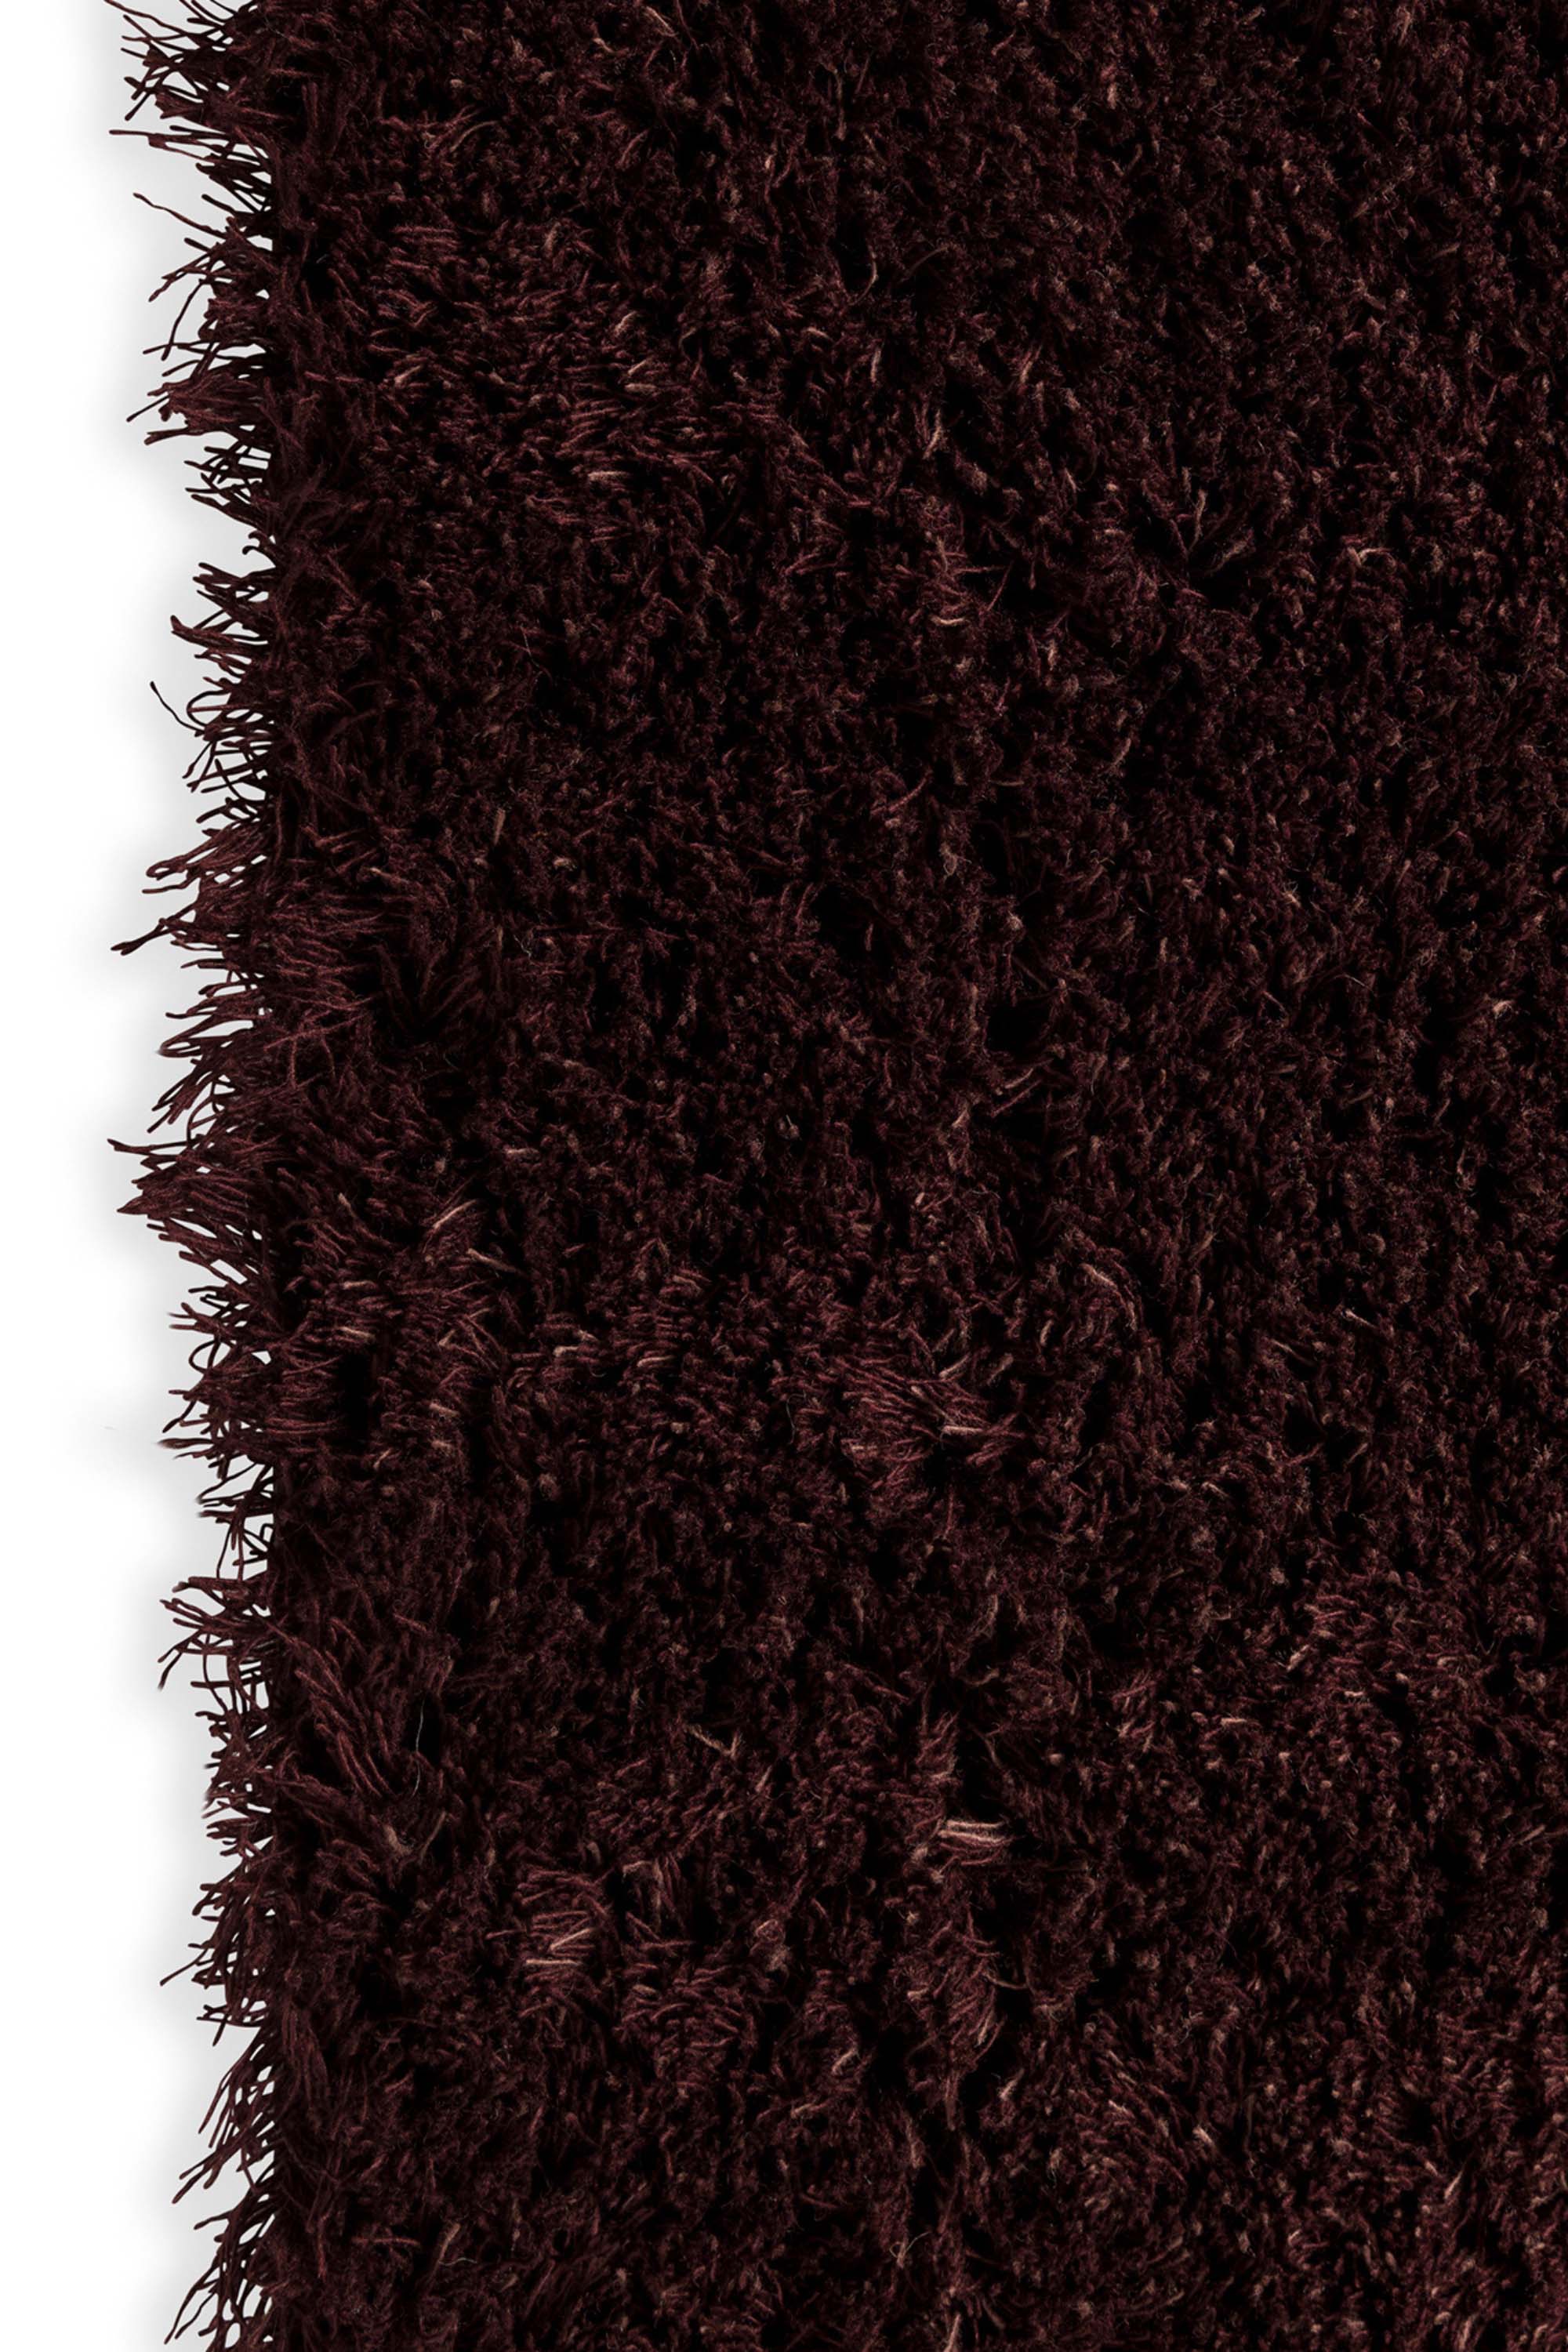 Plain red rug with shaggy pile